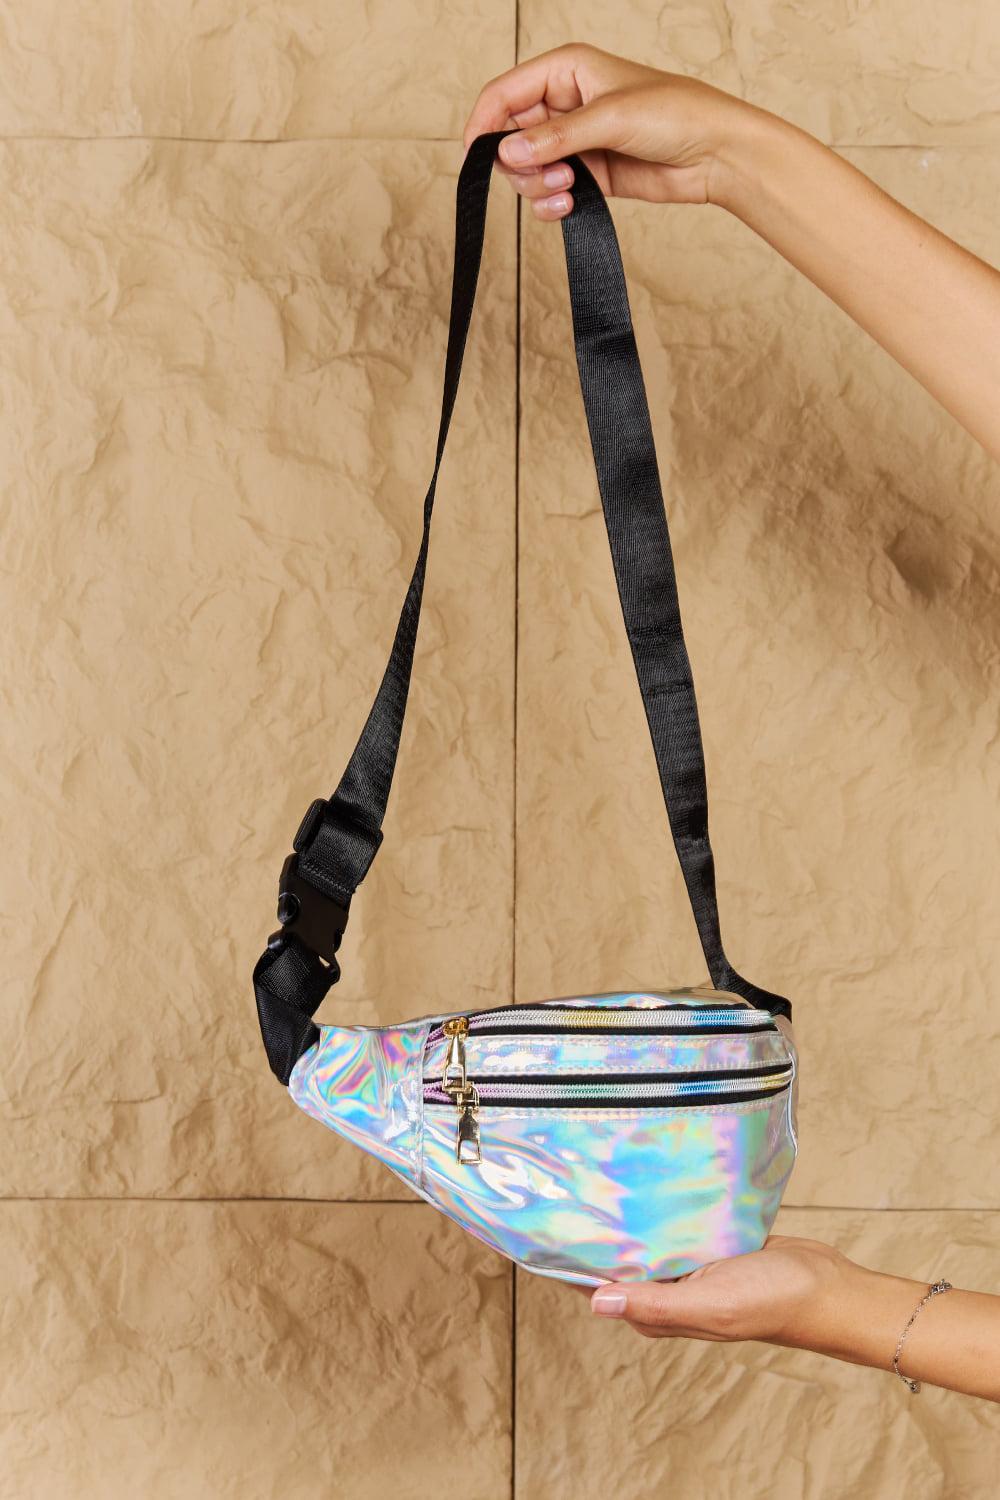 Fame Good Vibrations Holographic Double Zipper Fanny Pack in Silver BLUE ZONE PLANET